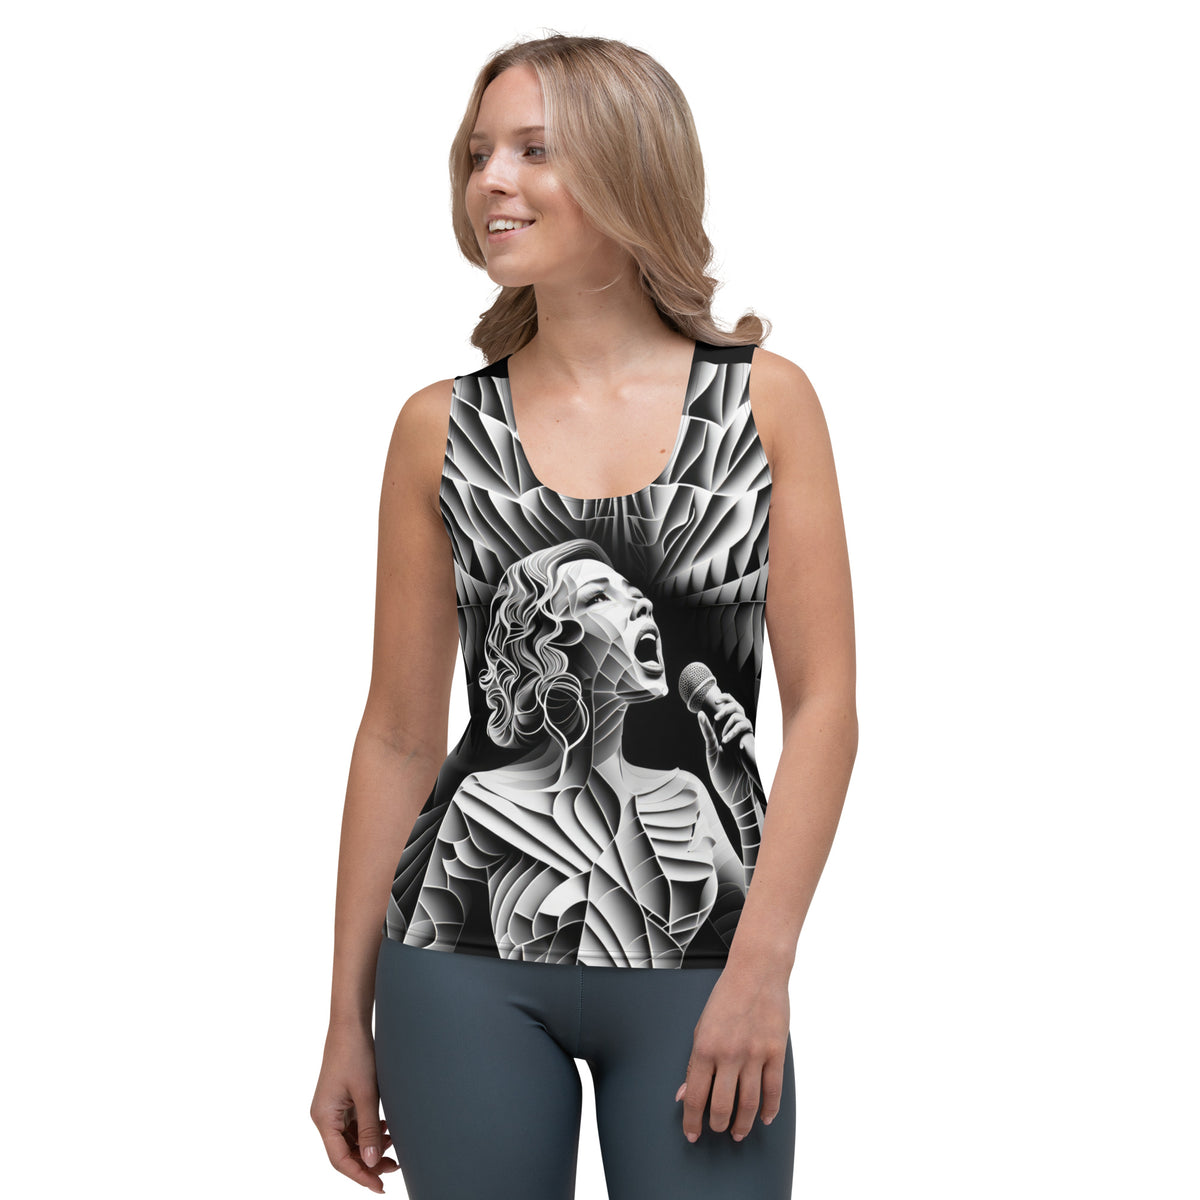 Symphonic Style All-Over Print Women's Tank Top